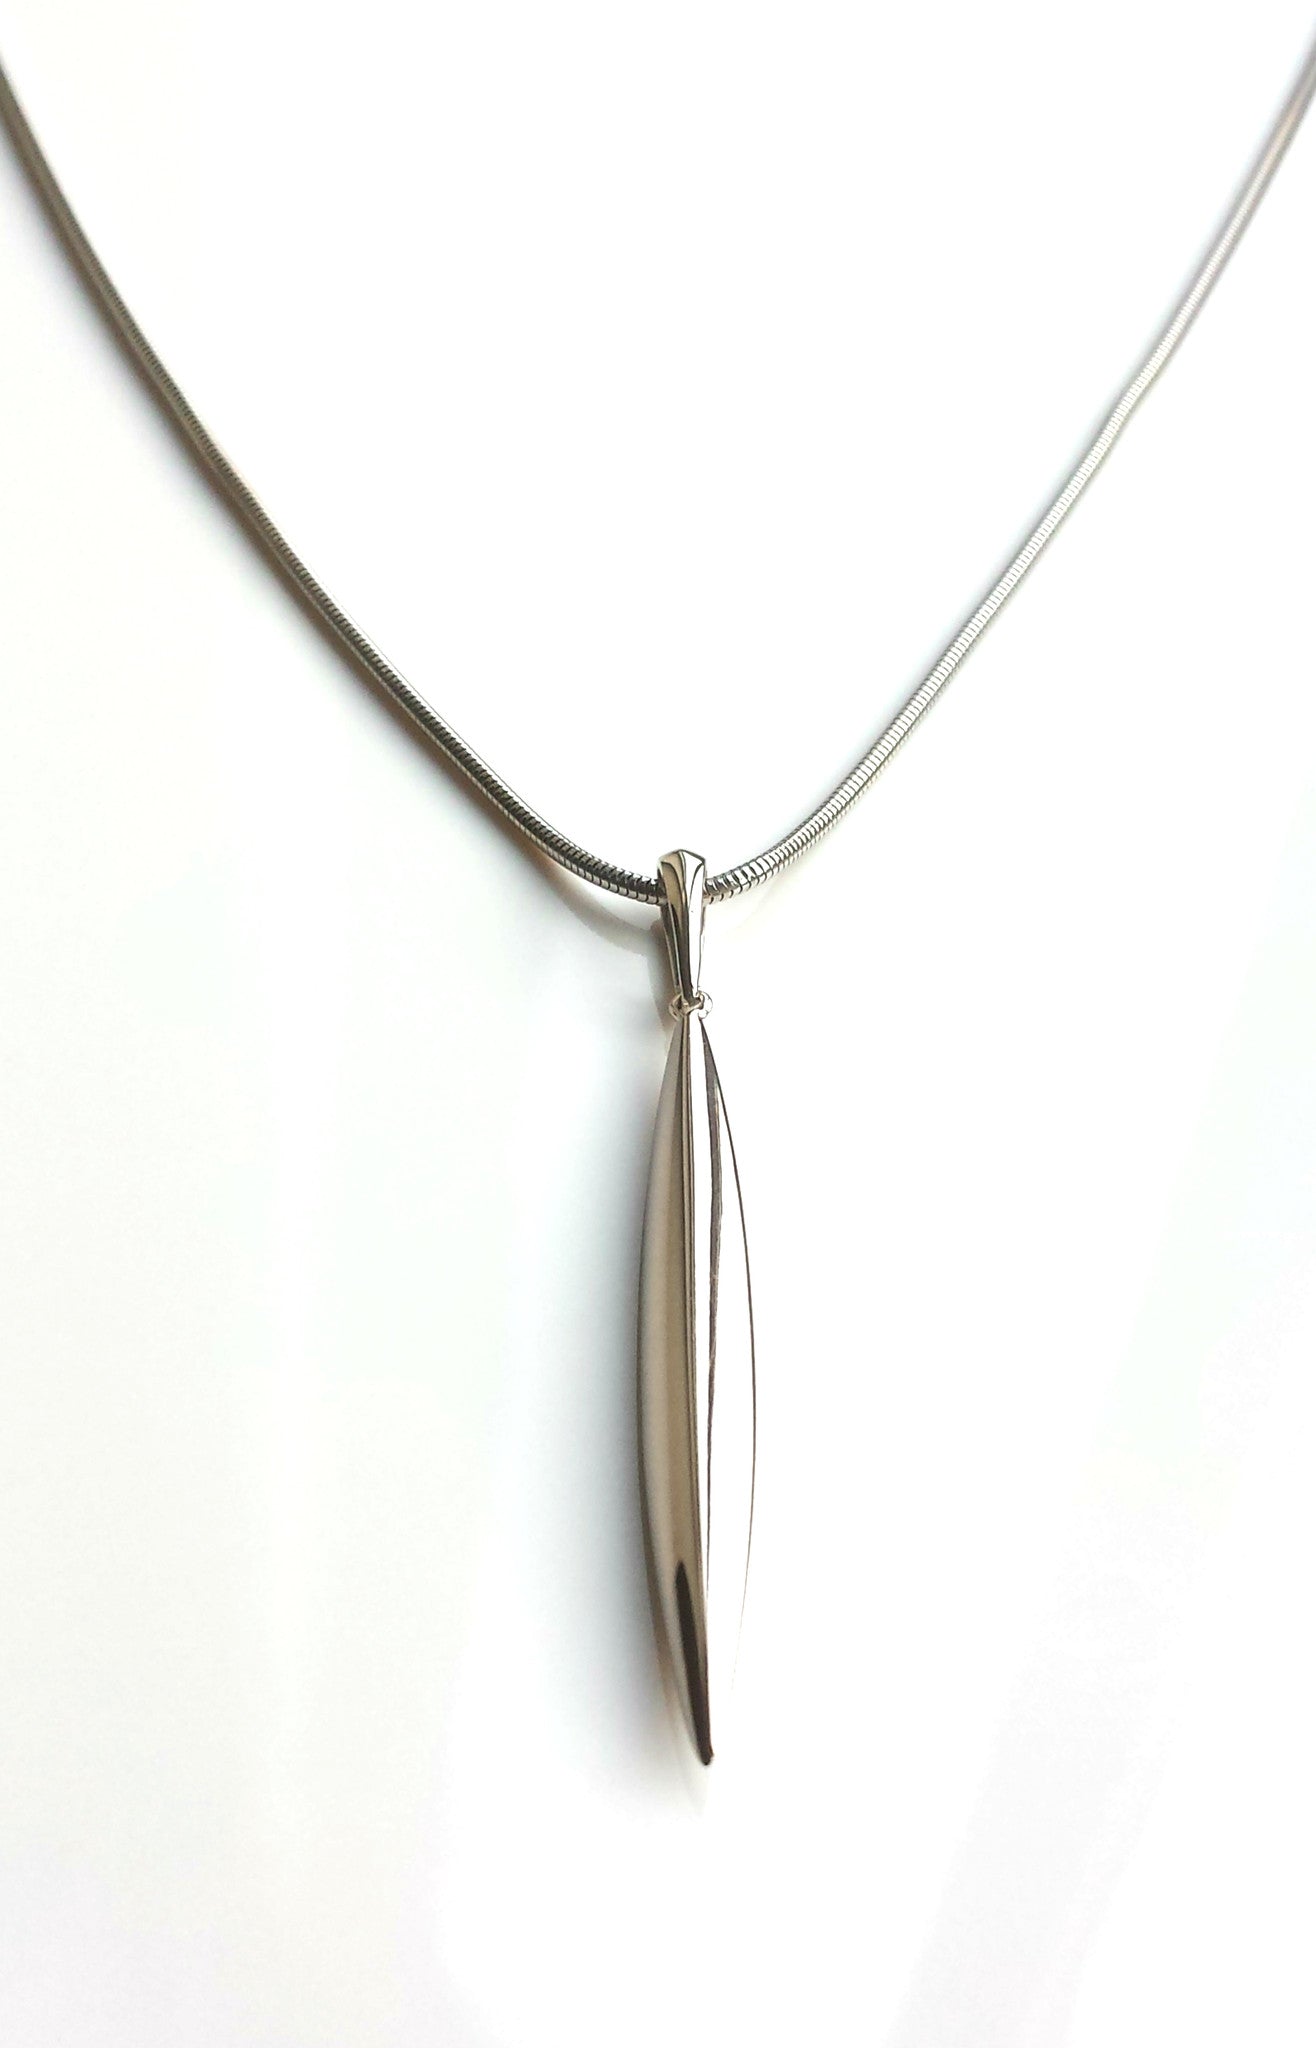 Tiffany & Co. 18k White Gold Feather Lucite Necklace, 18 inches